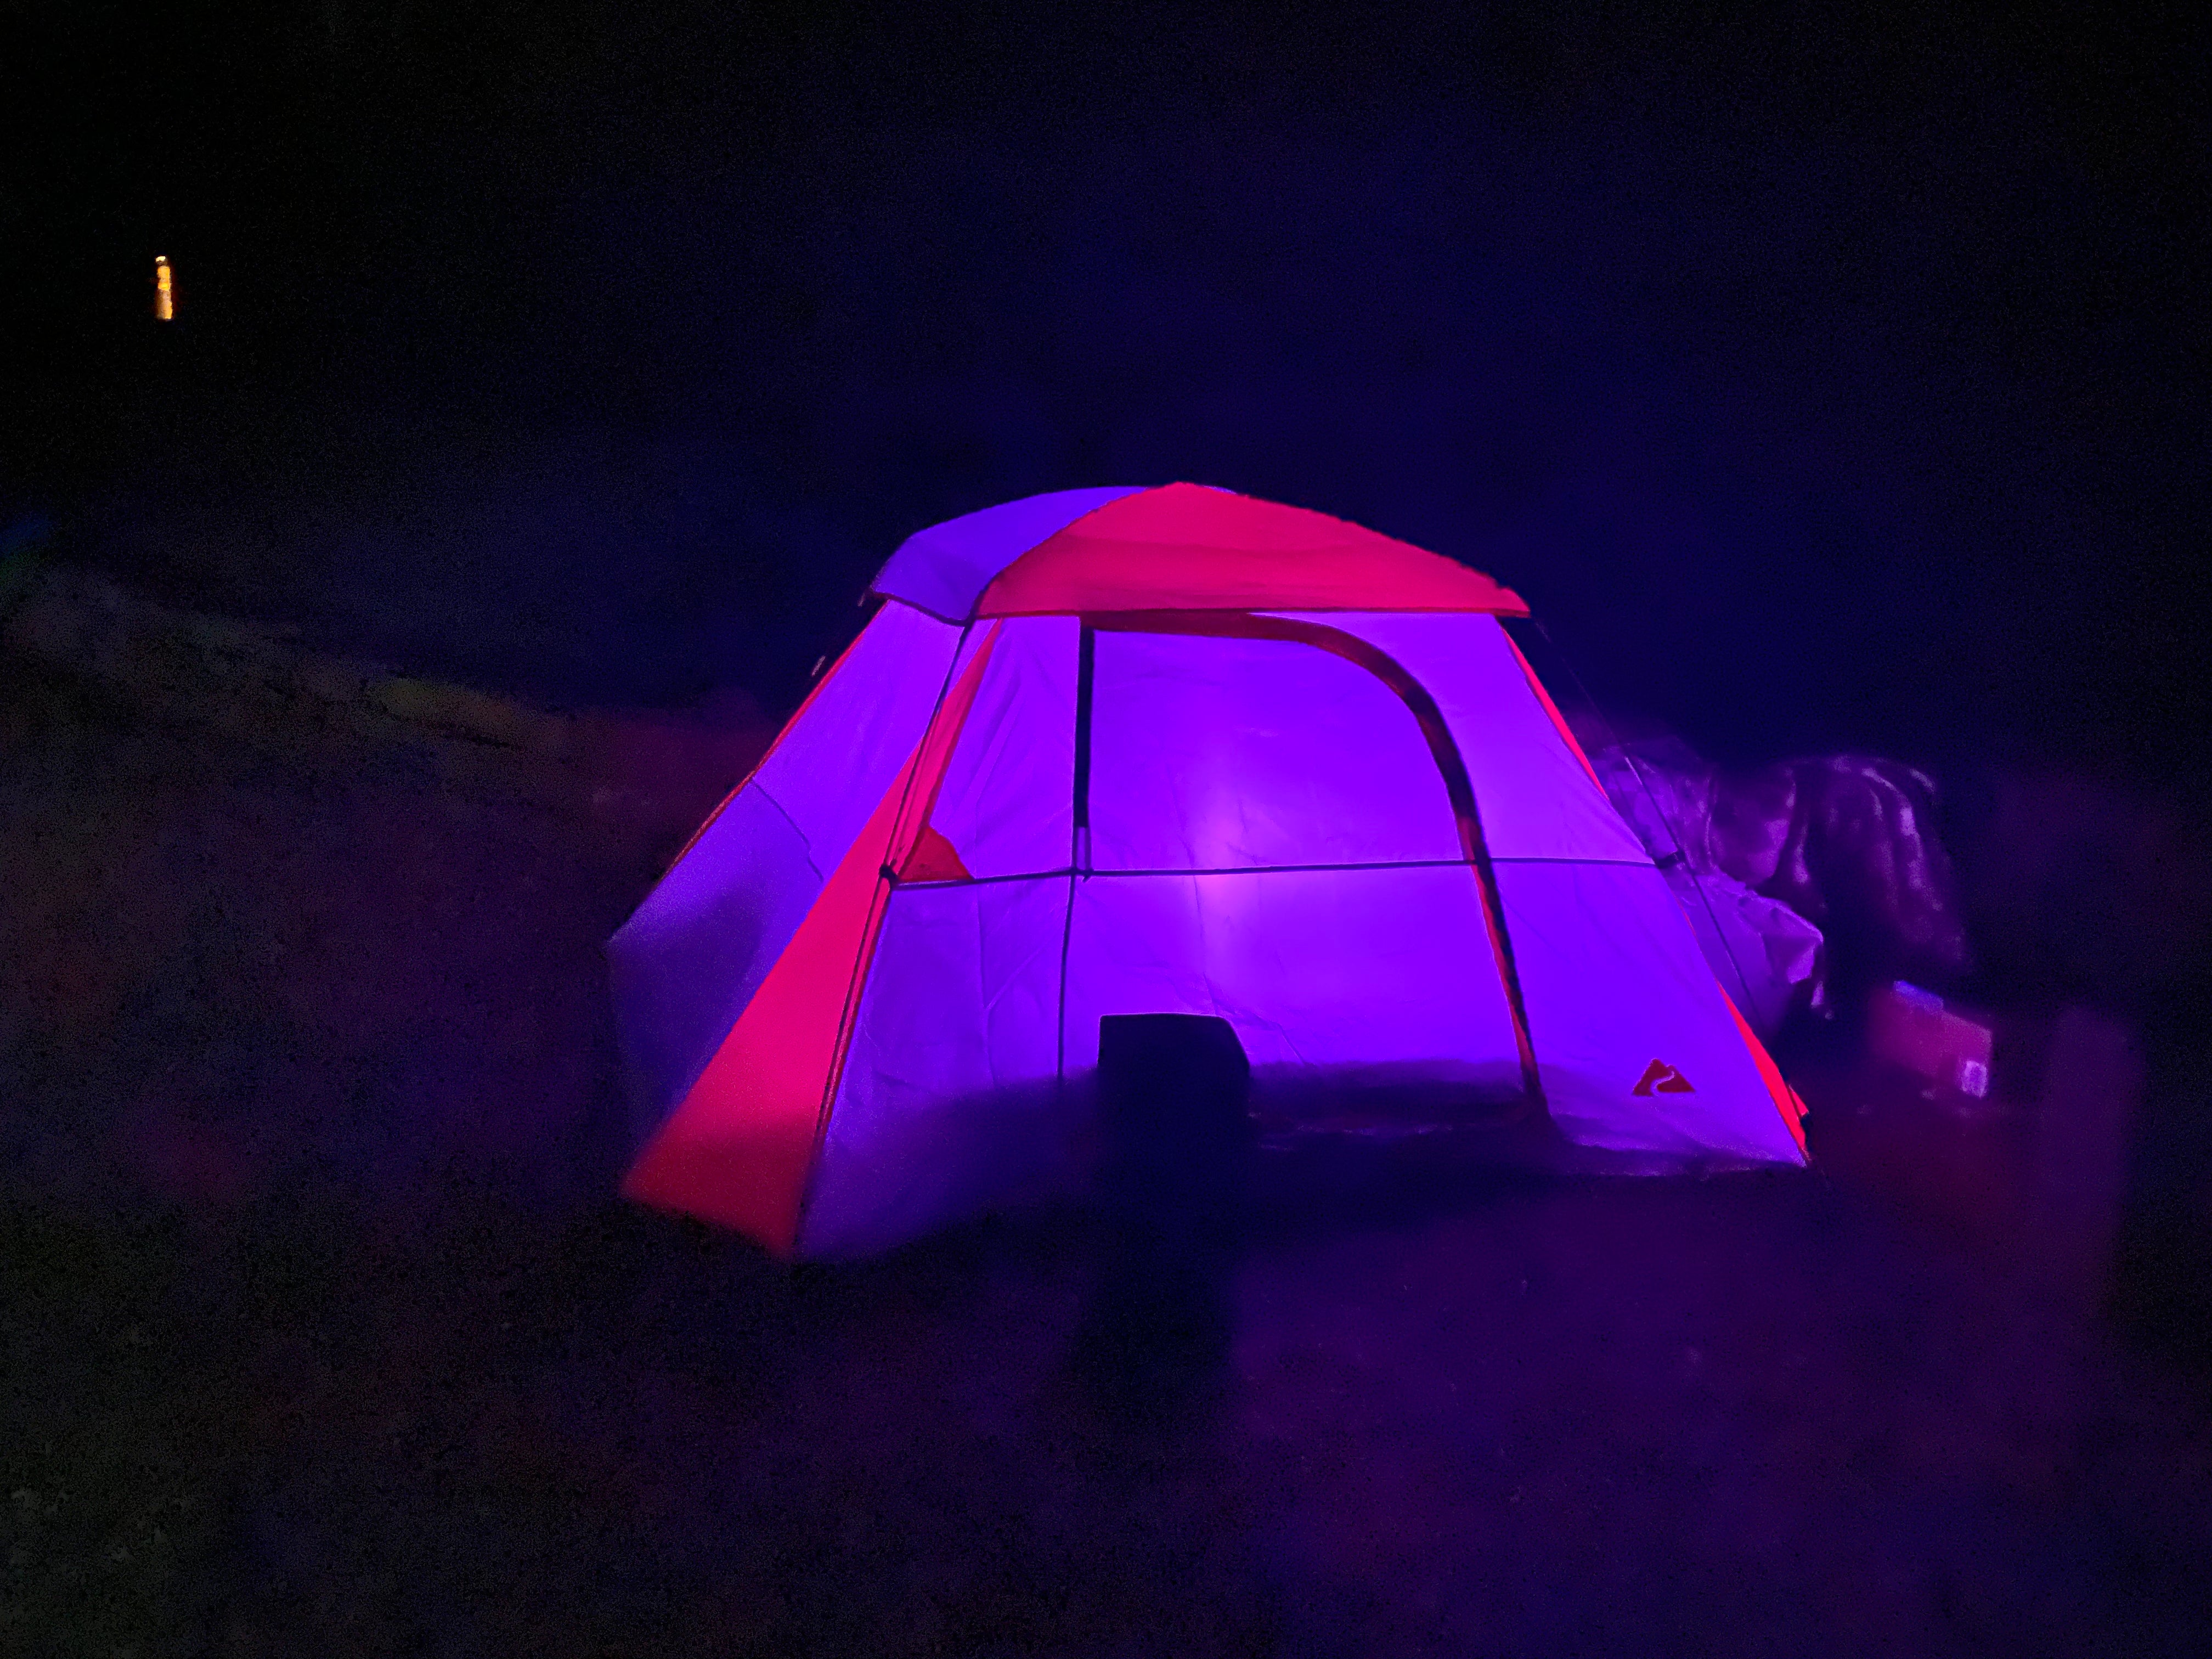 Our colorful tent